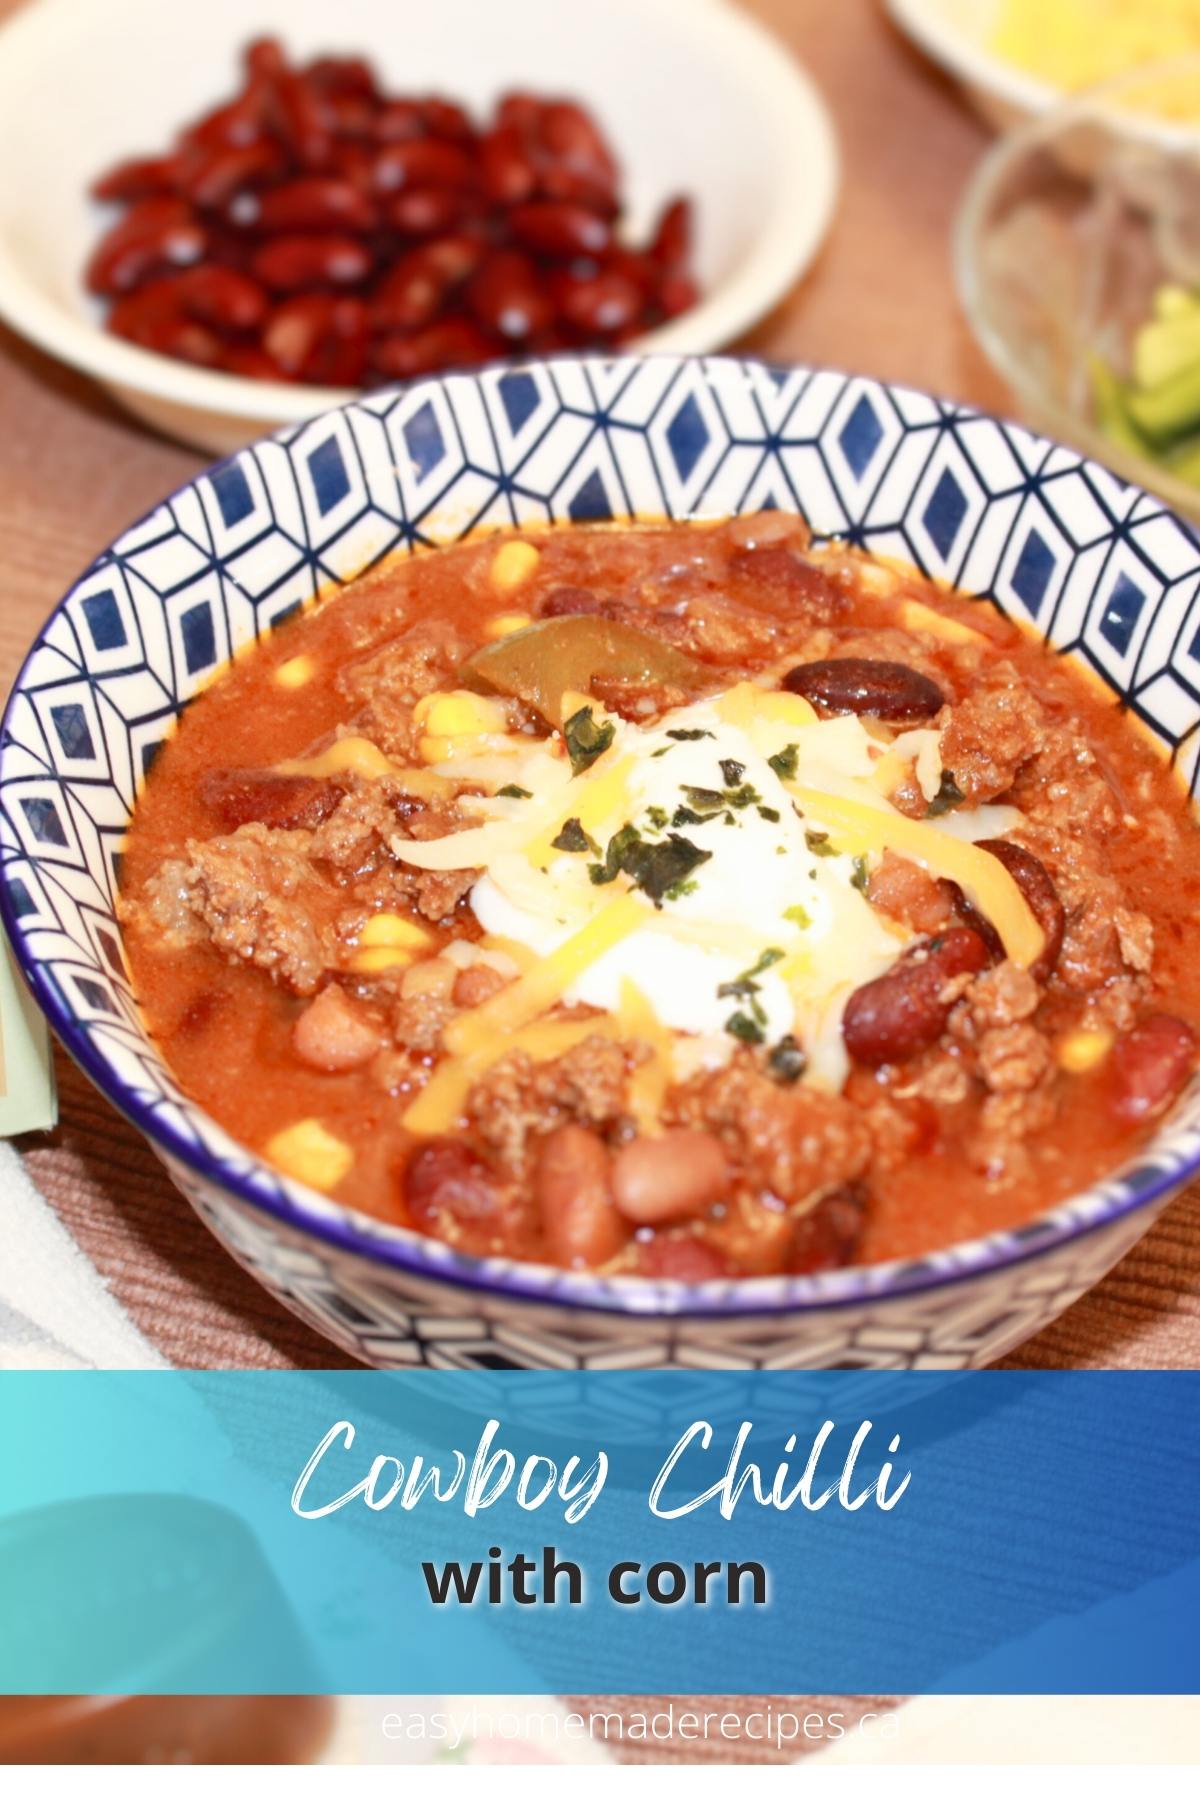 Cowboy chili in a blue white bowl on a brown placemat PIN for Pinterest.